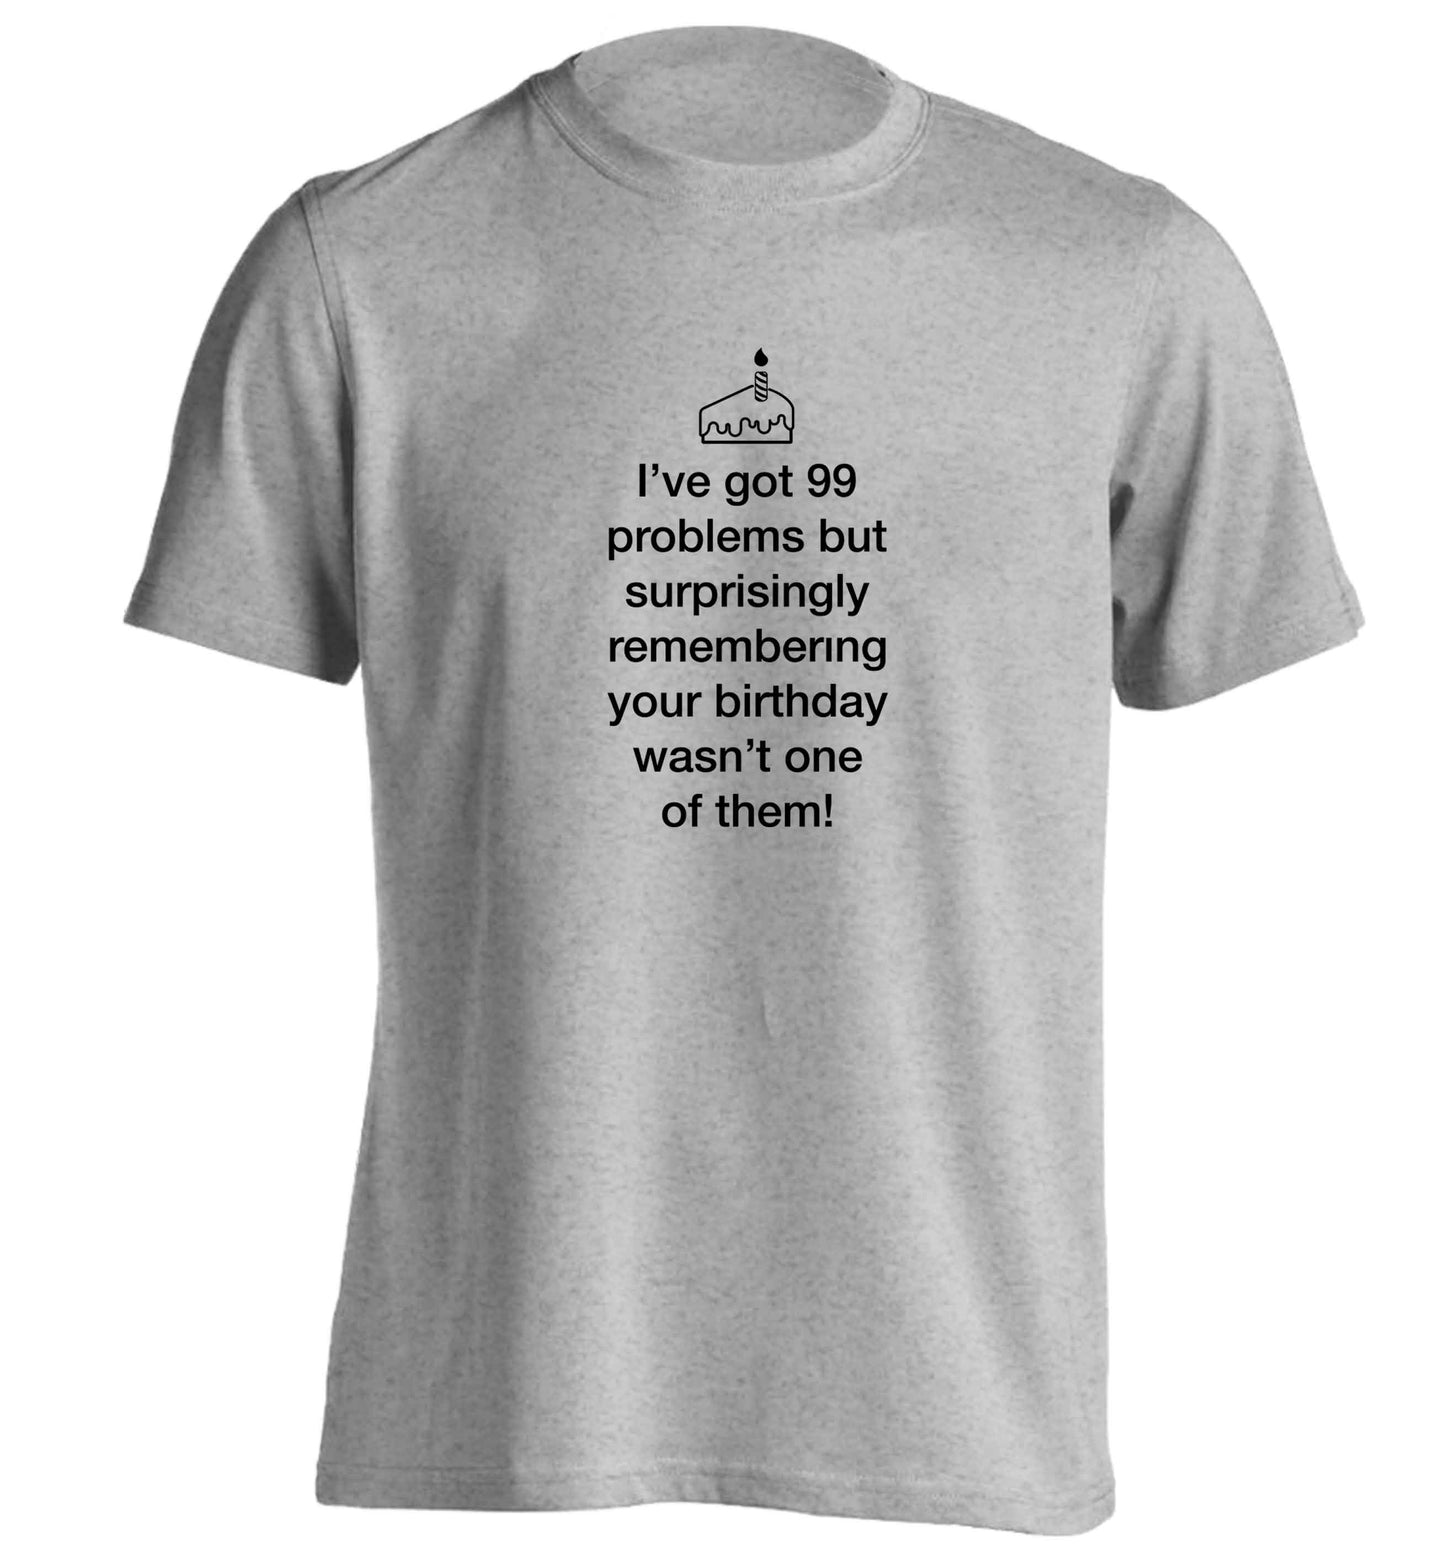 I've got 99 problems but surprisingly remembering your birthday wasn't one of them! adults unisex grey Tshirt 2XL